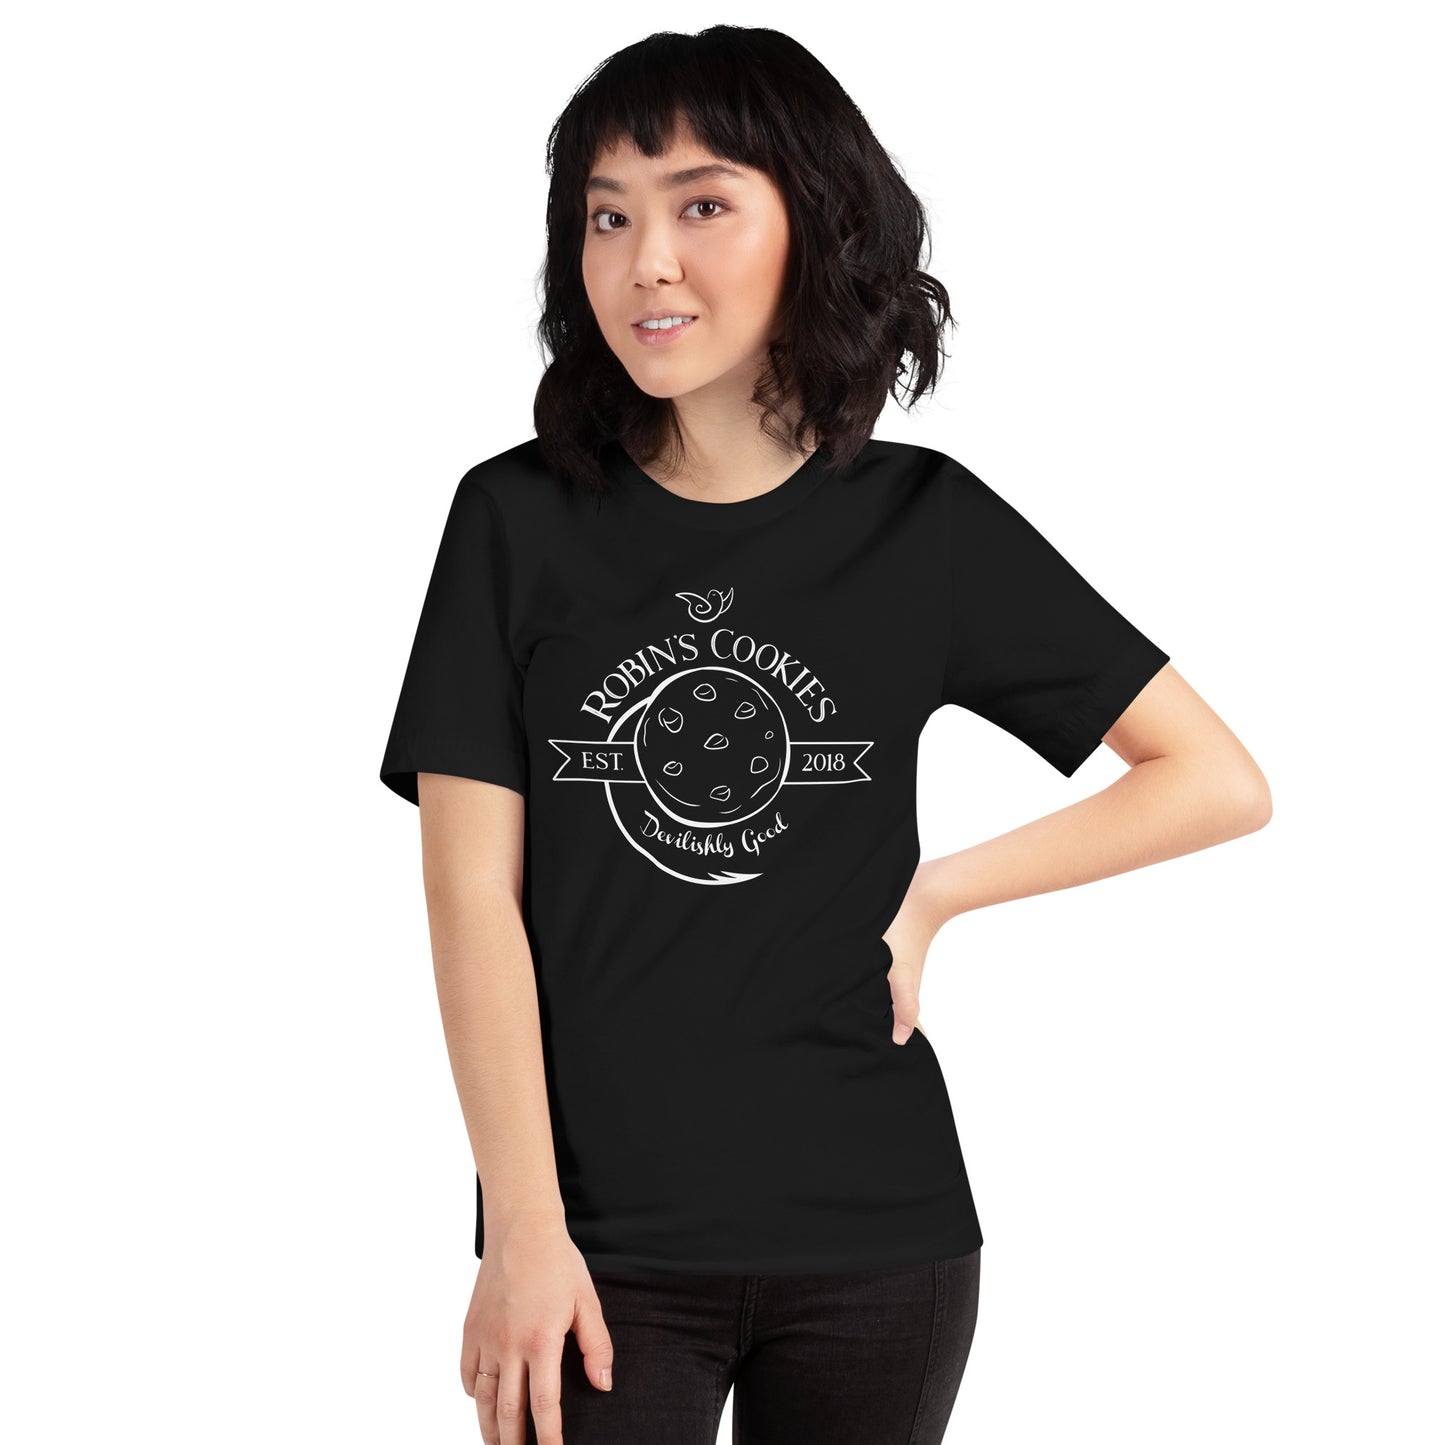 "Robin's Cookies" Unisex T-shirt (The Guild Codex)